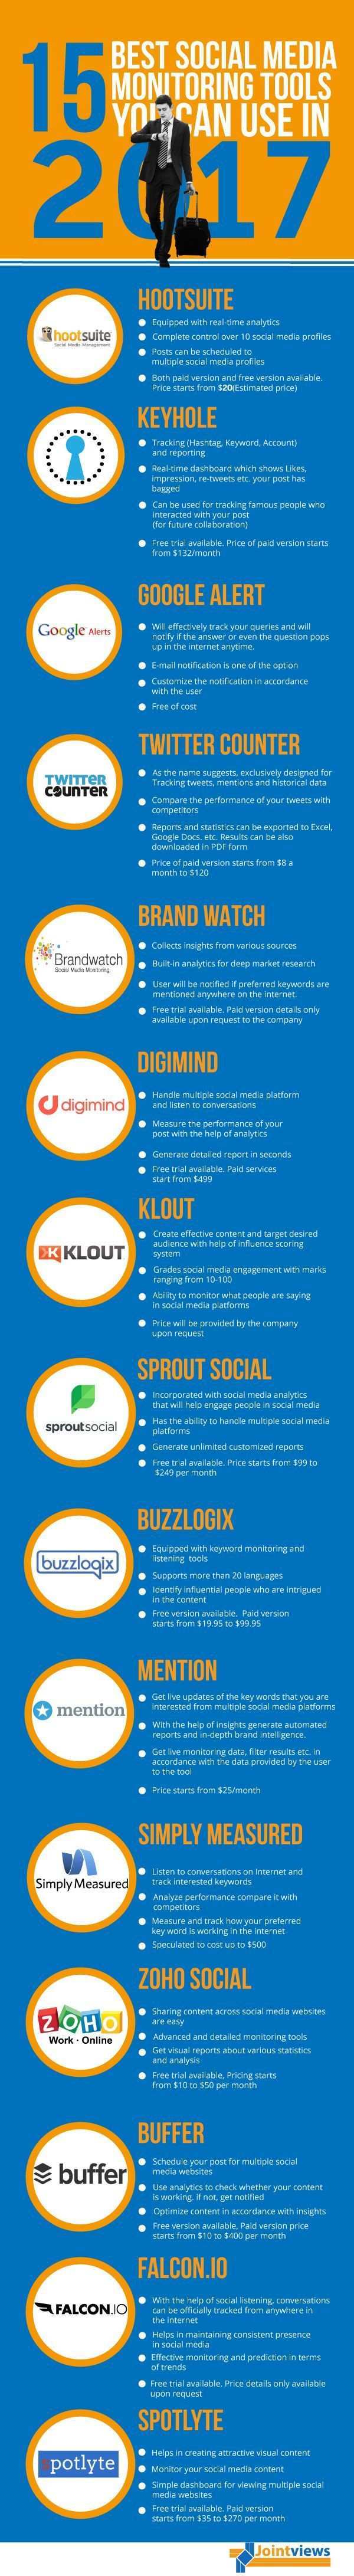 Infographic 15 Tools To Measure And Monitor Your Social Media Efforts Articles Main Social Media Monitoring Tools Top Social Media Internet Marketing